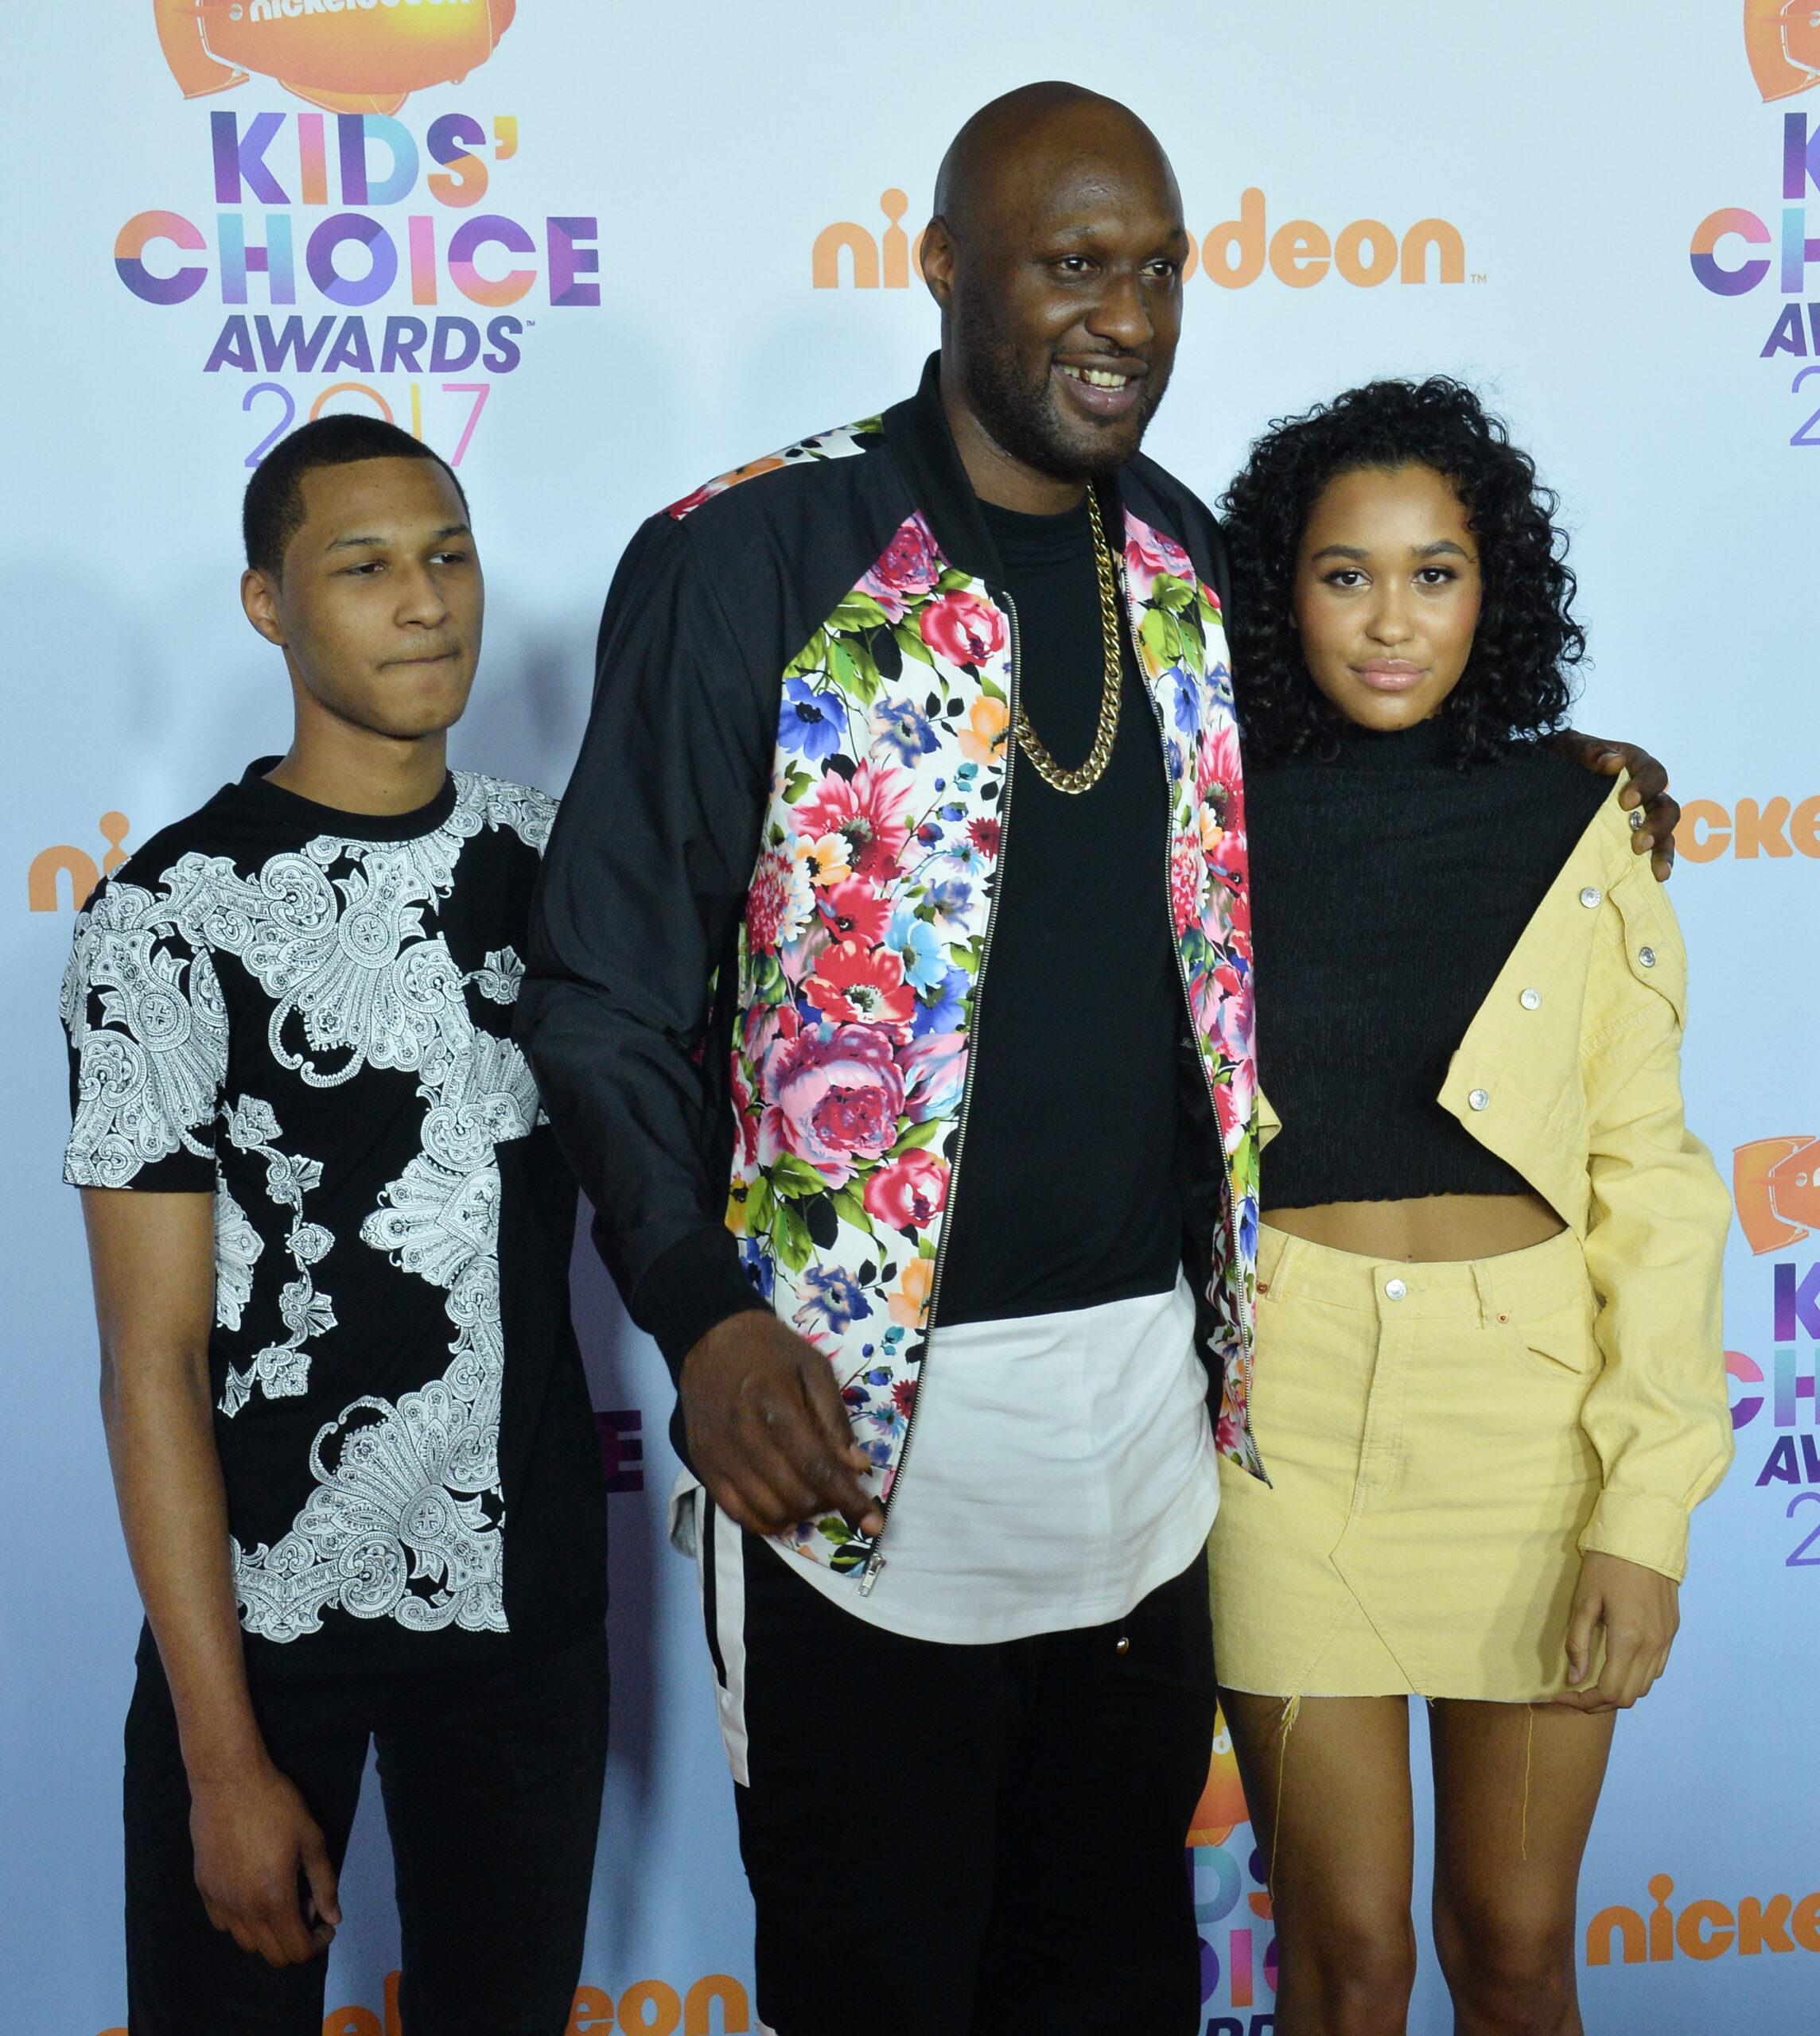 Lamar Odom, son and daughter attend the Kids' Choice Awards in Los Angeles